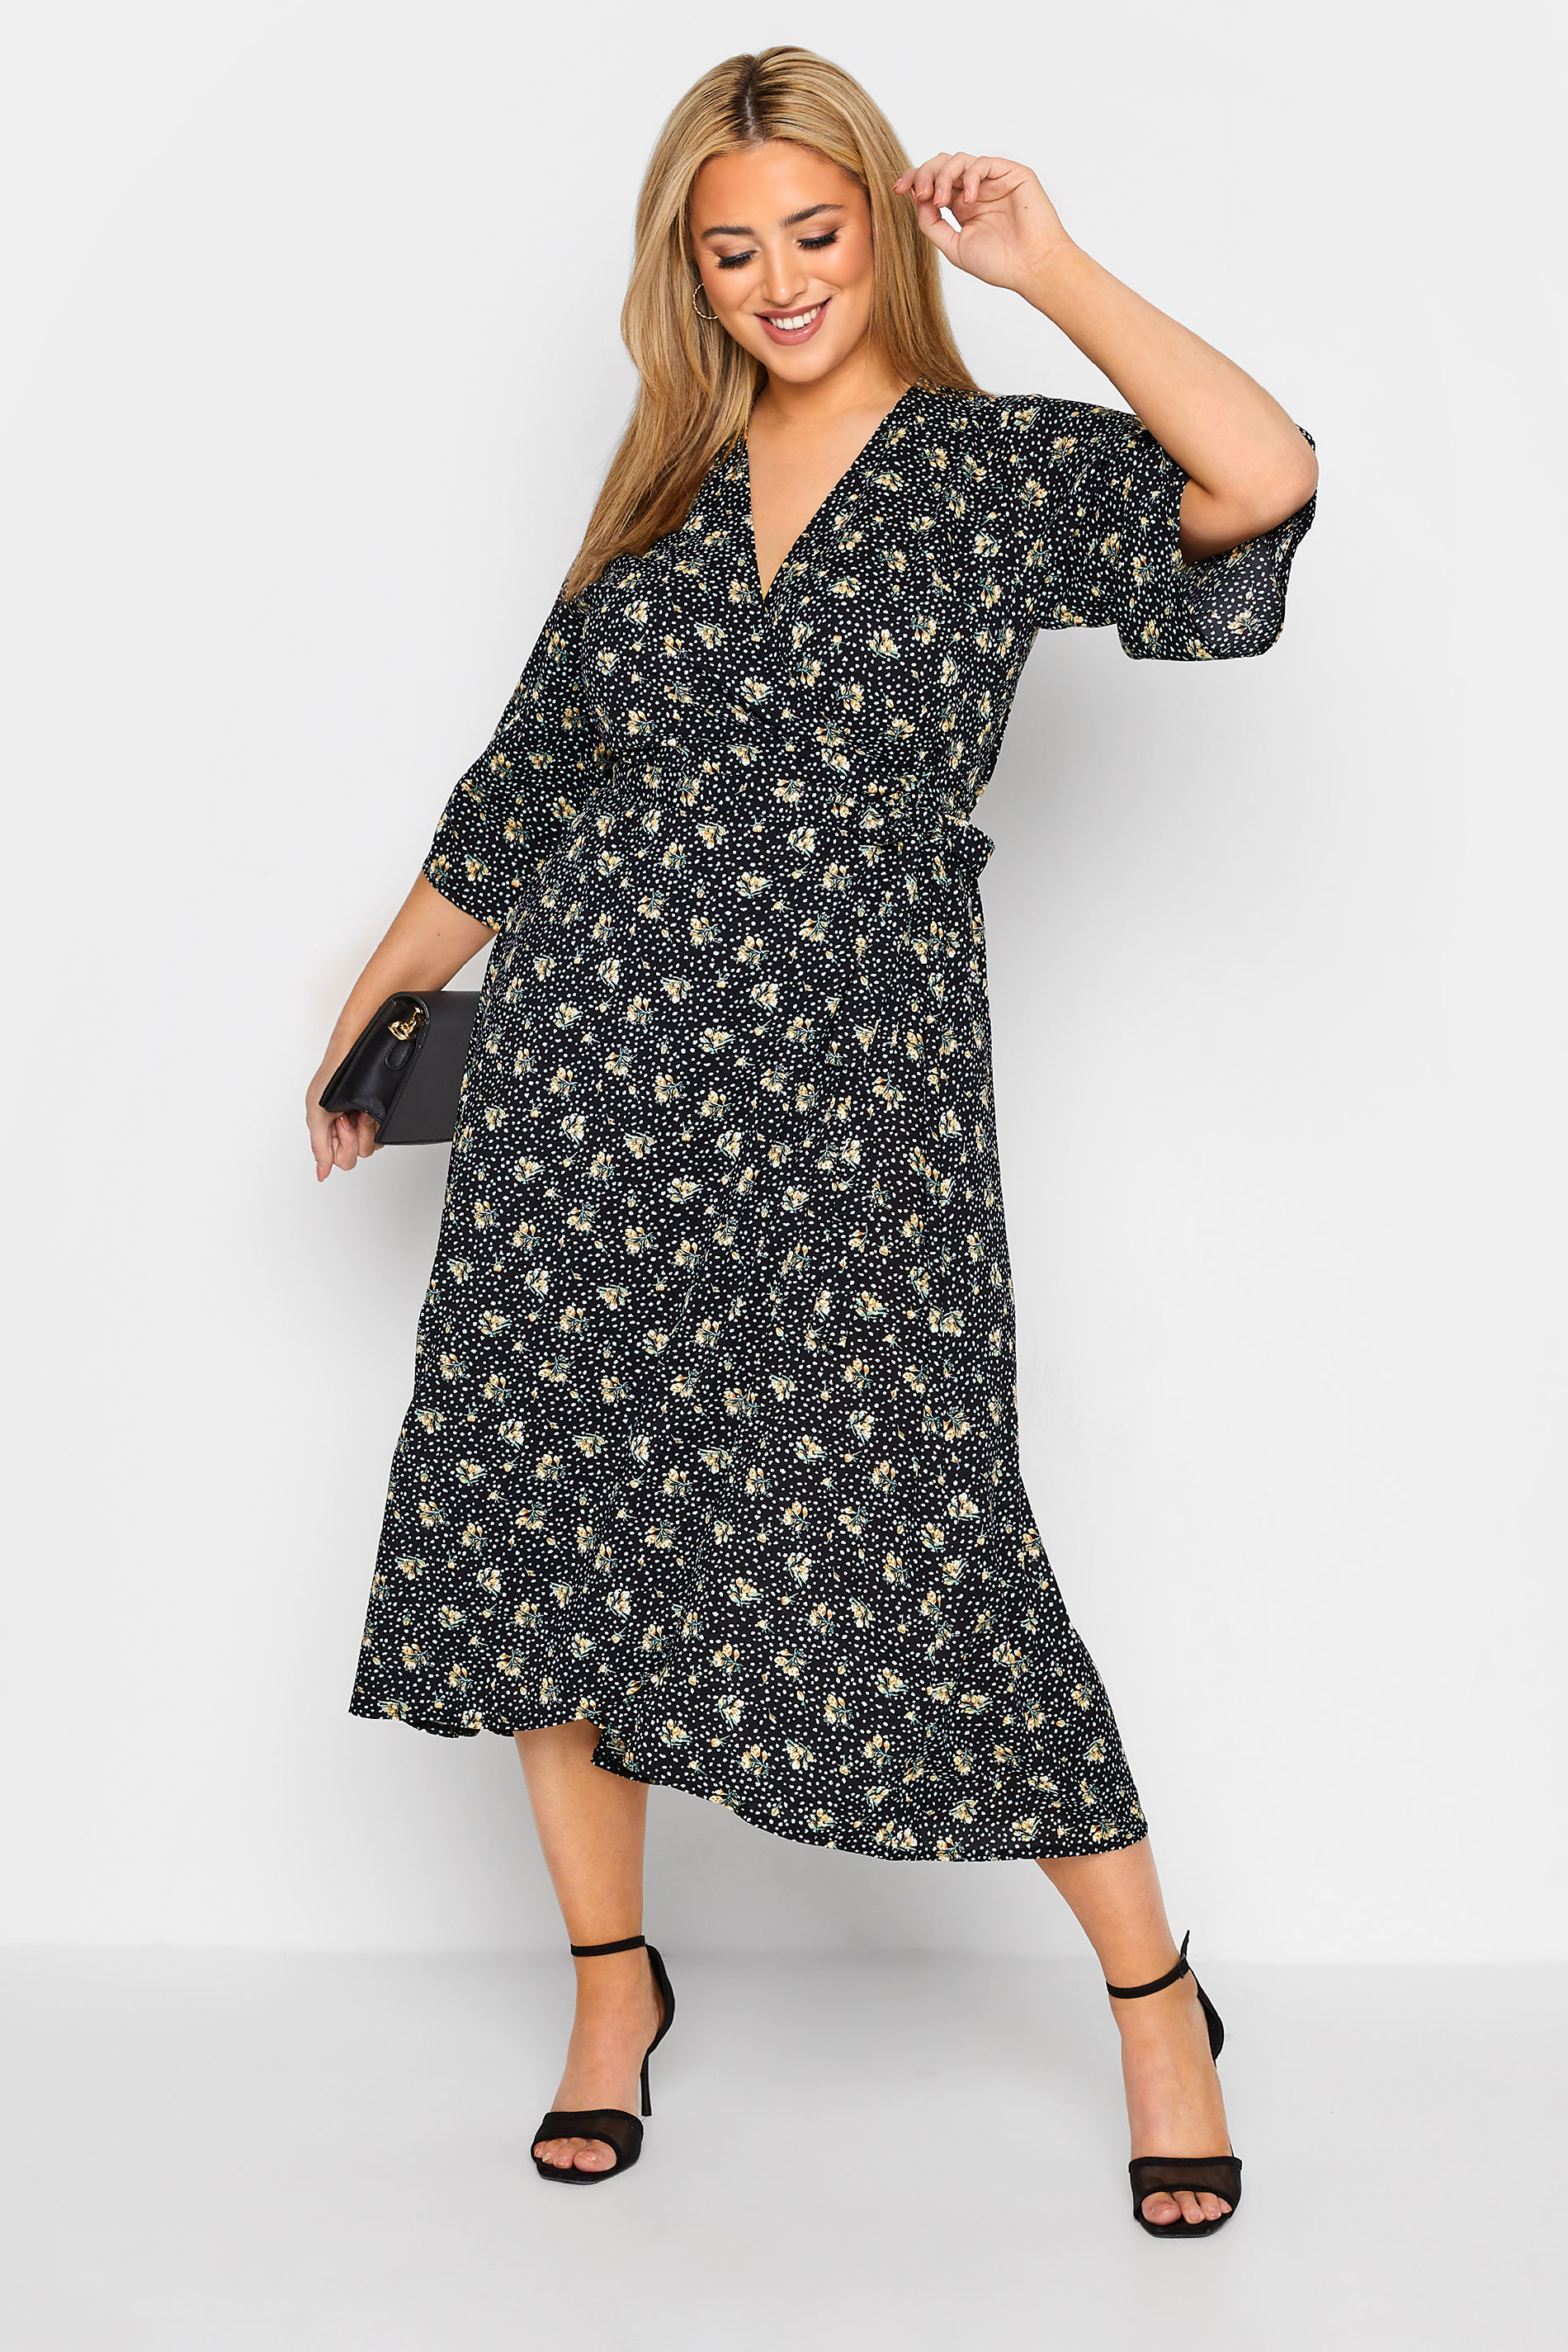 YOURS LONDON Plus Size Black Floral Midaxi Wrap Dress | Yours Clothing